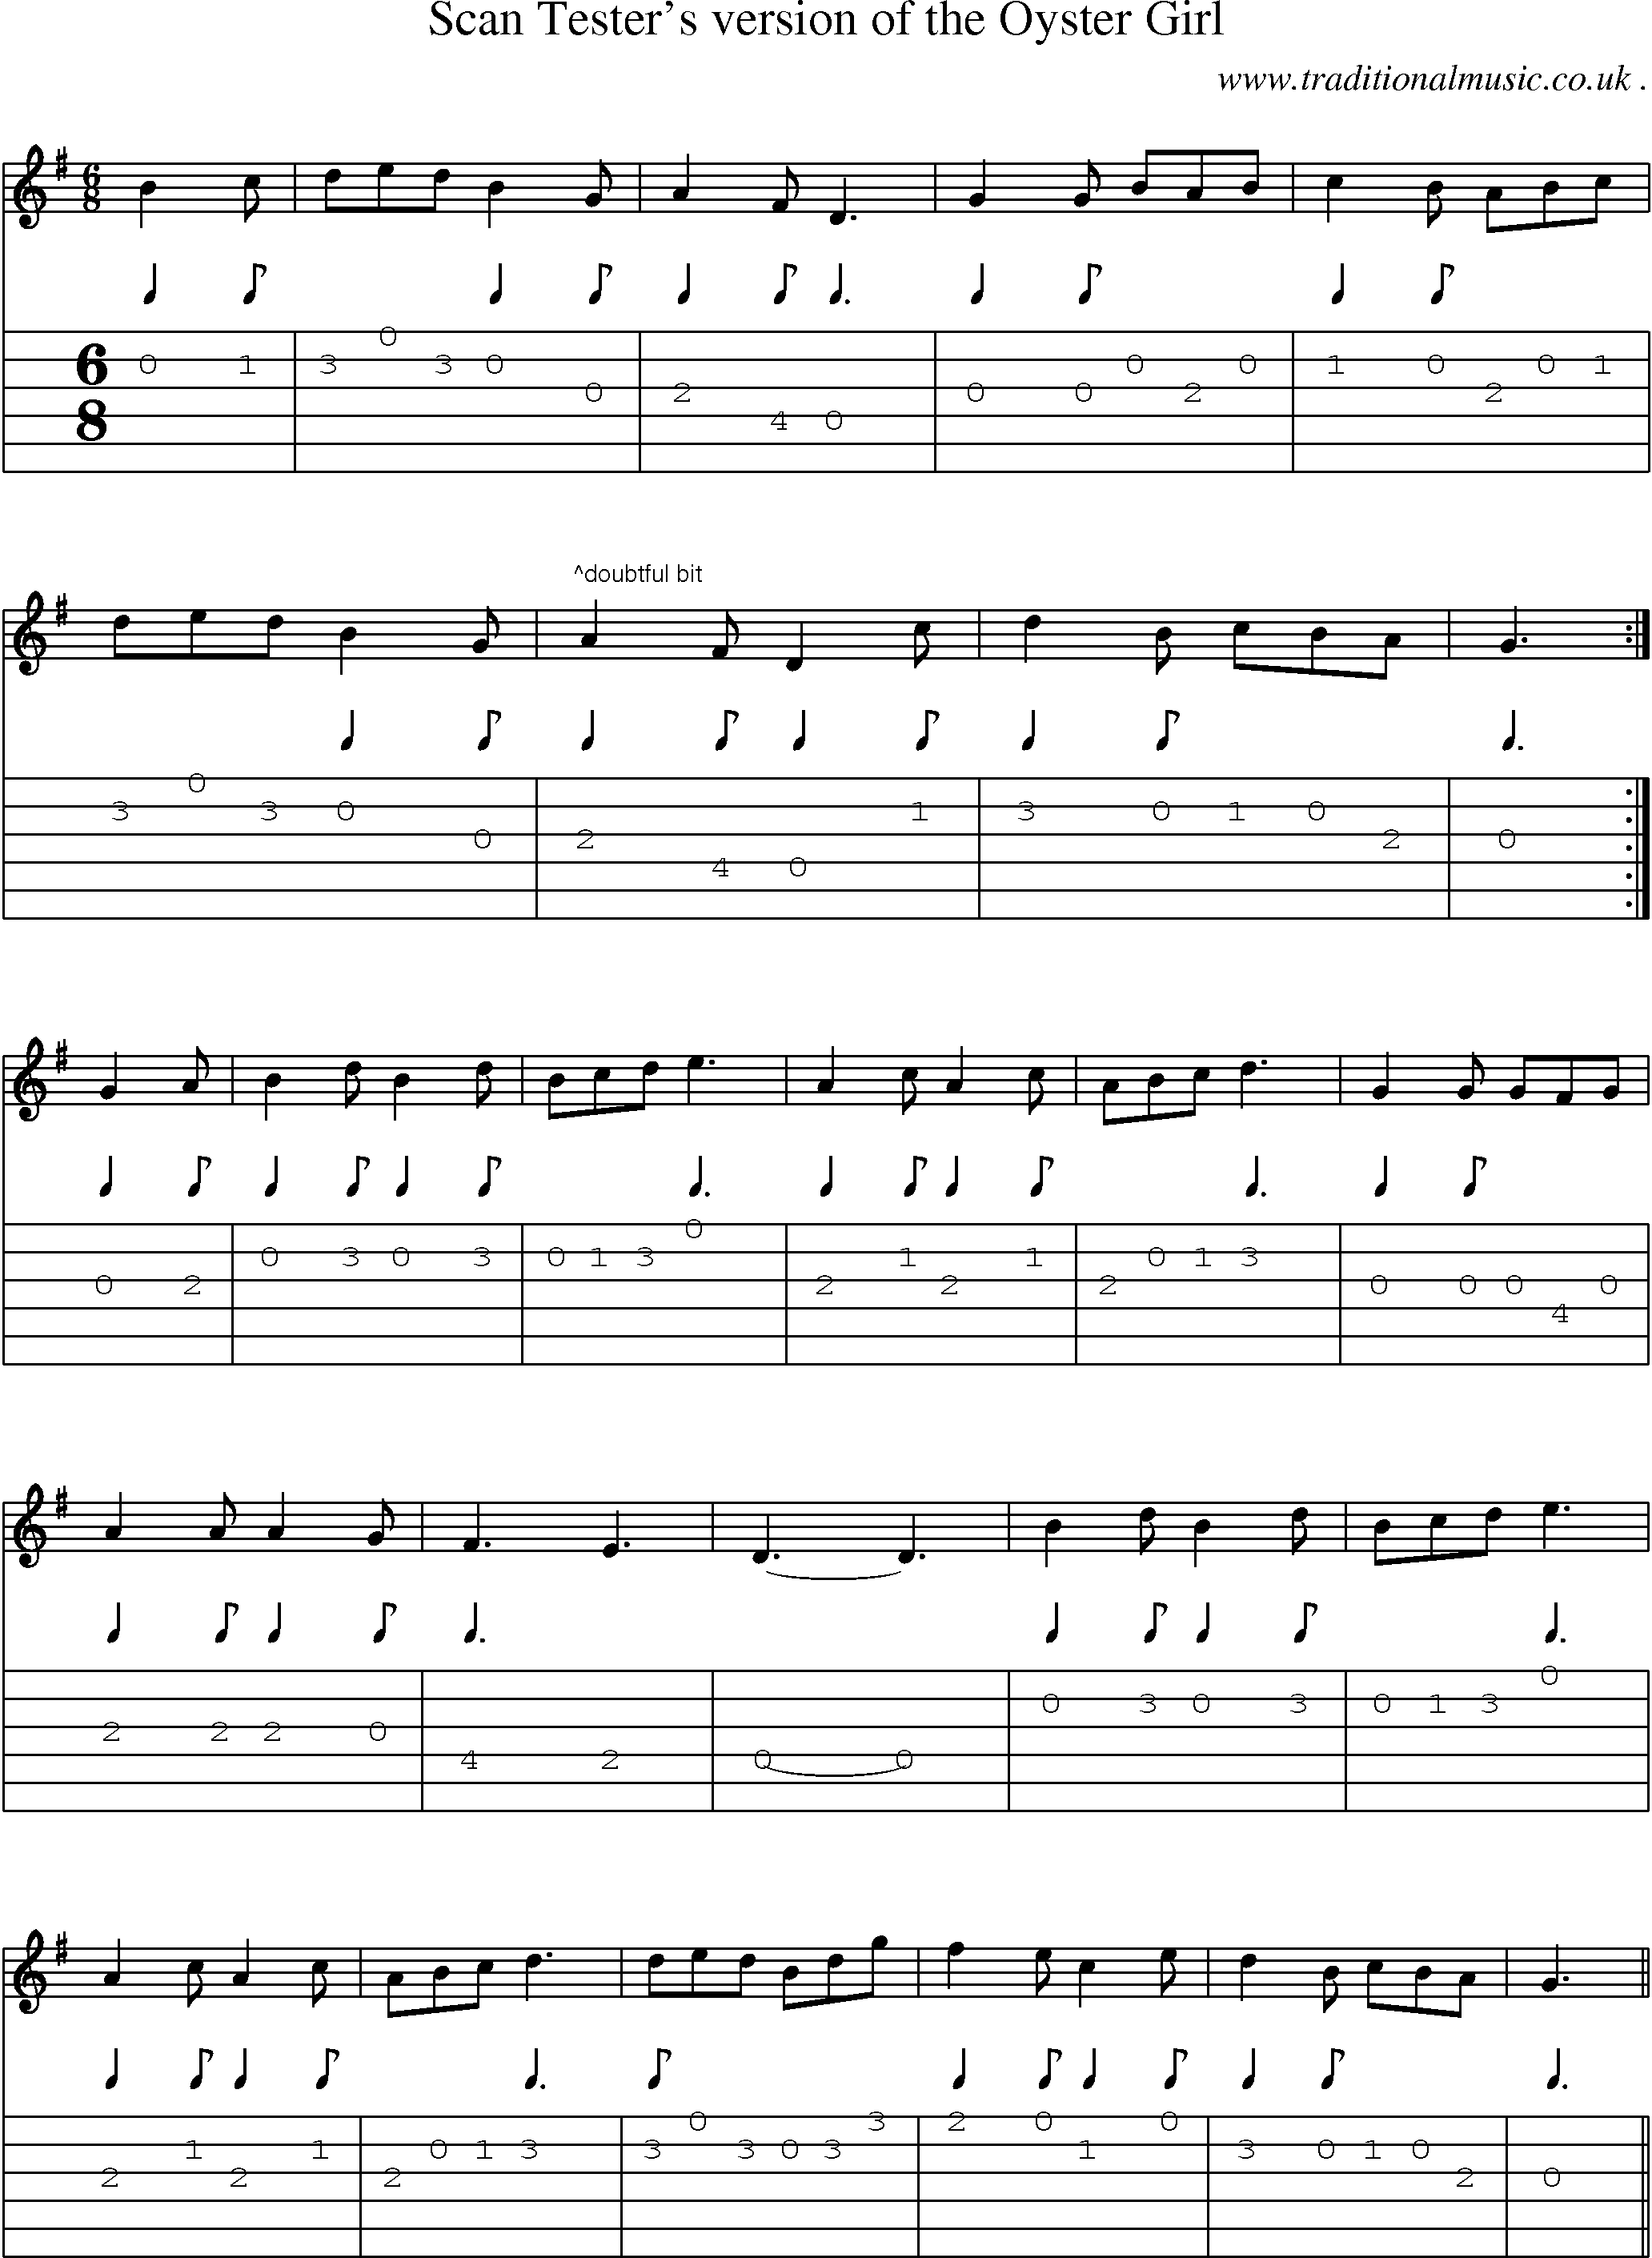 Sheet-Music and Guitar Tabs for Scan Testers Version Of The Oyster Girl